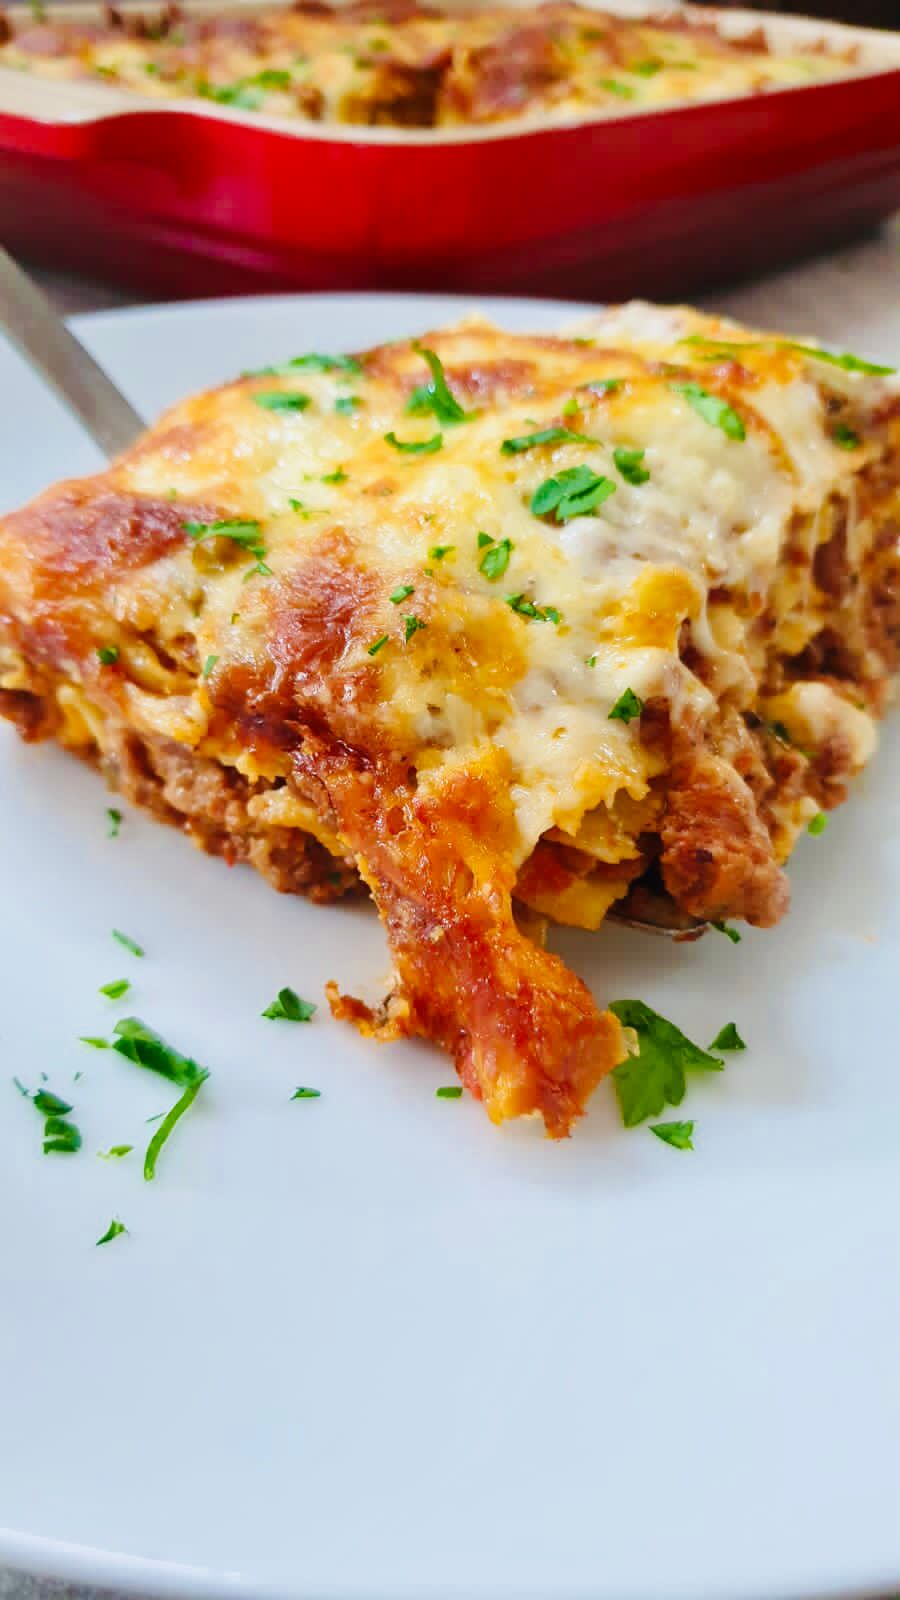 Lasagna Recipe With a Cheesy Sauce and Meat Filling